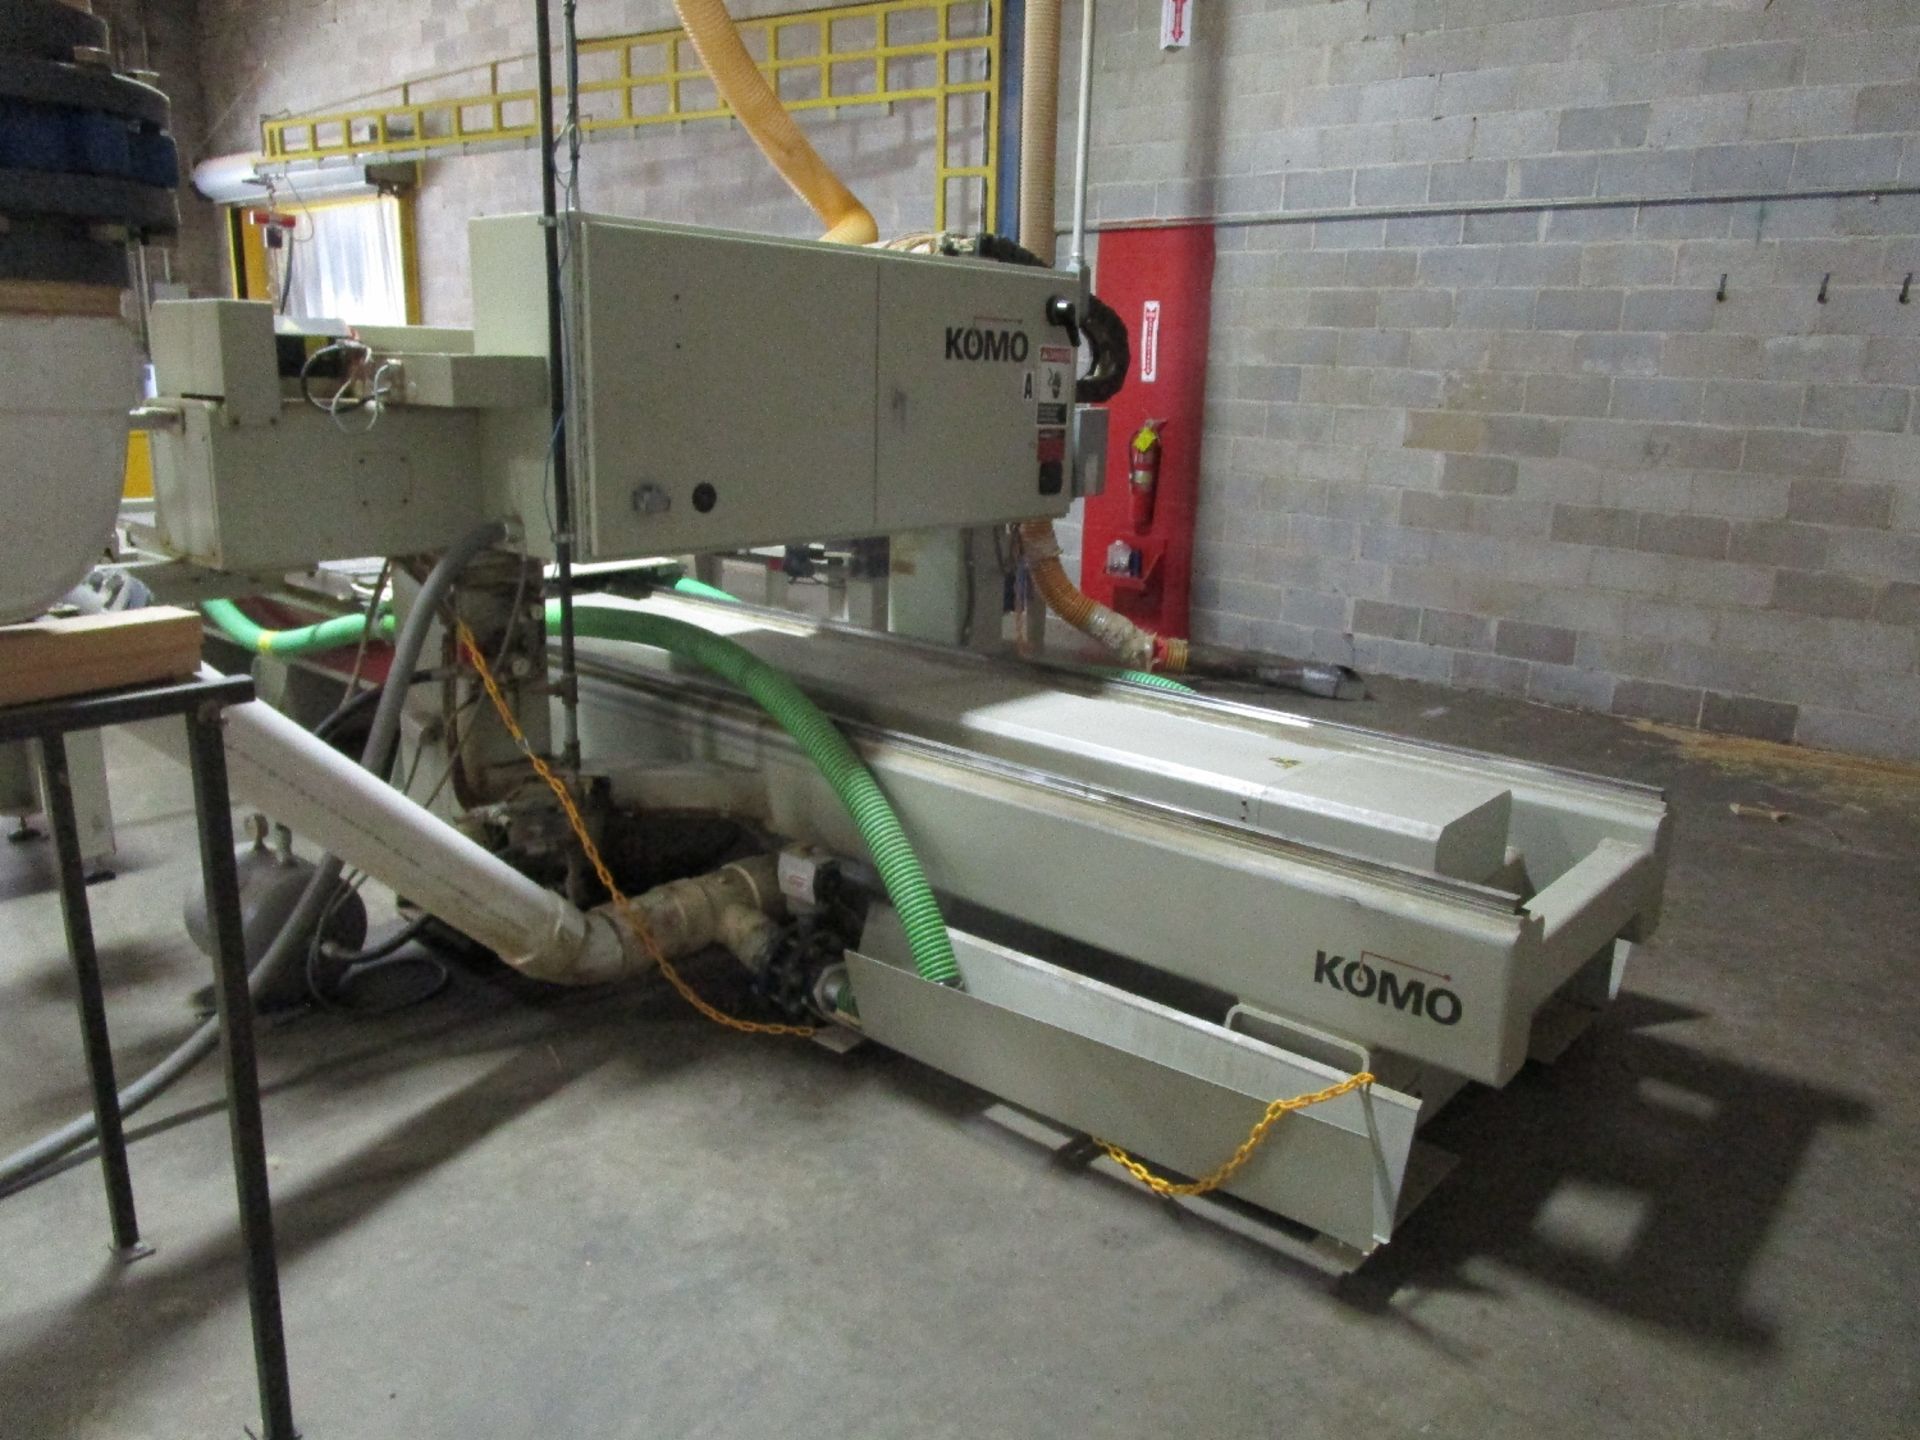 Komo VR 510 Mach Xtreme CNC Router - Image 9 of 9